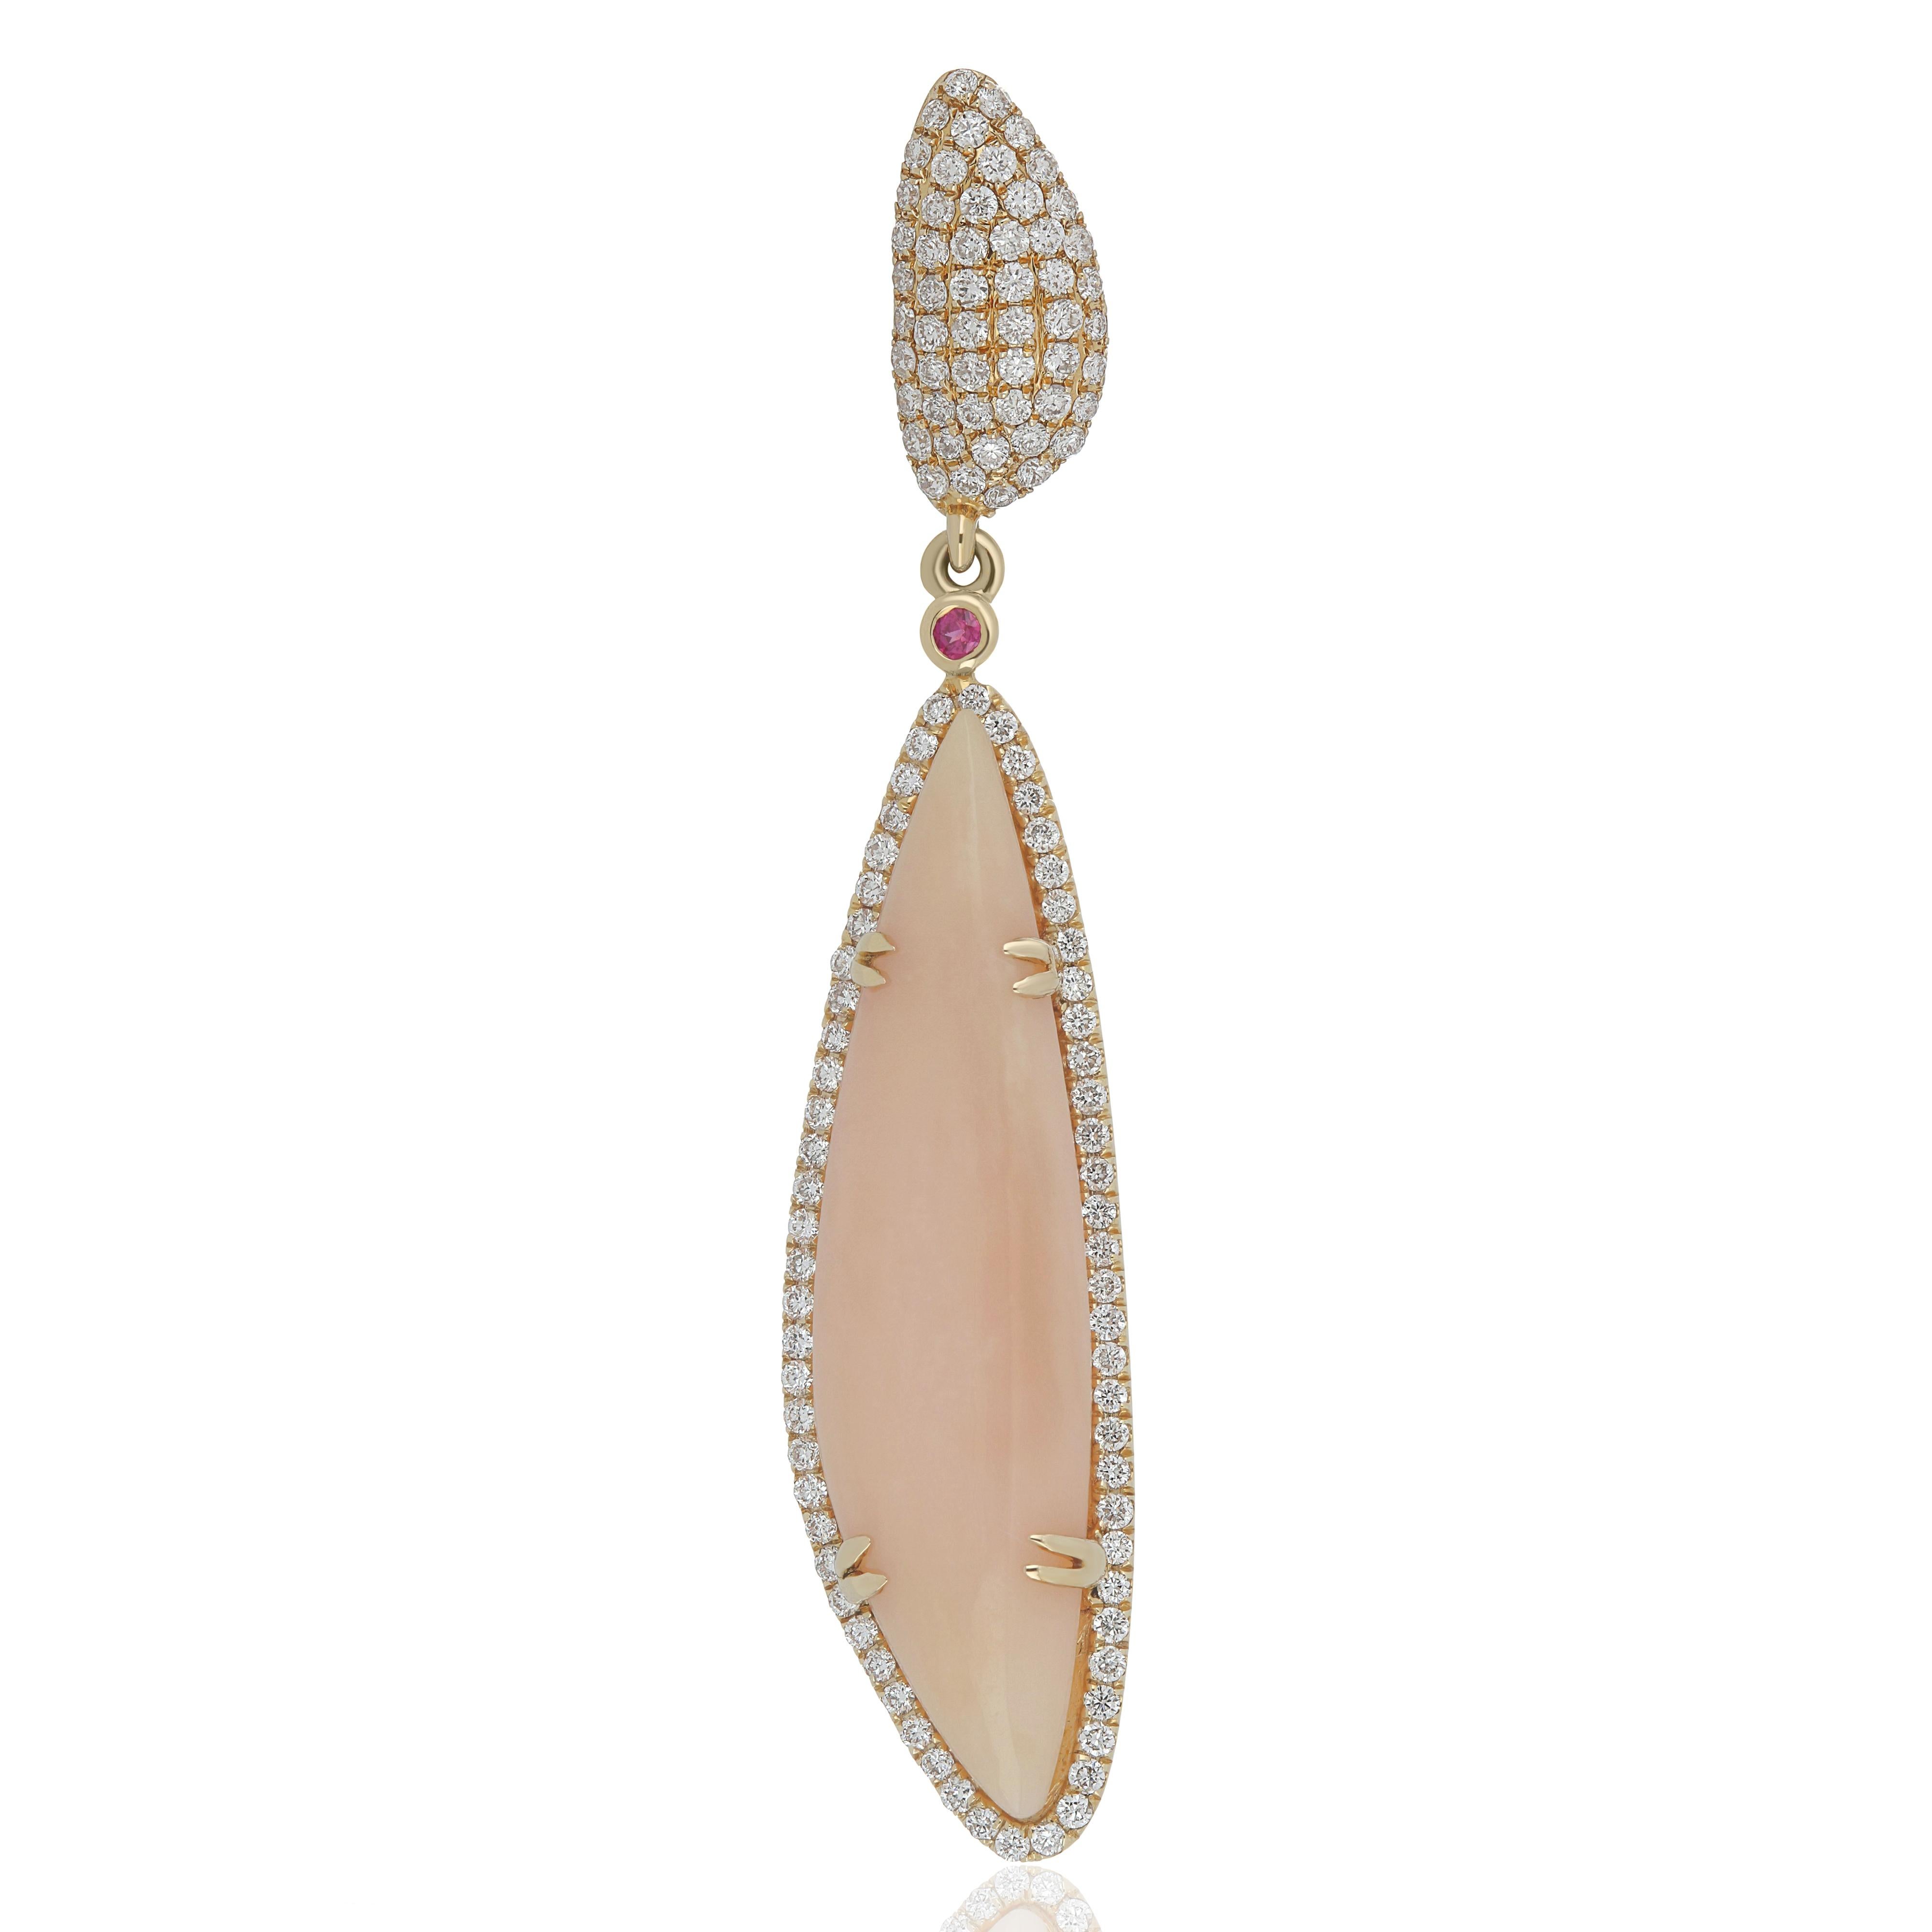 Elegant and exquisitely detailed 14 Karat Yellow Gold Pendant , center set with 3.95 Cts .Cab Fancy Shape Pink Opal, and 0.02 Cts of Round Cut Ruby accented with and micro pave set Diamonds, weighing approx. 0.456 Cts Beautifully Hand crafted in 14